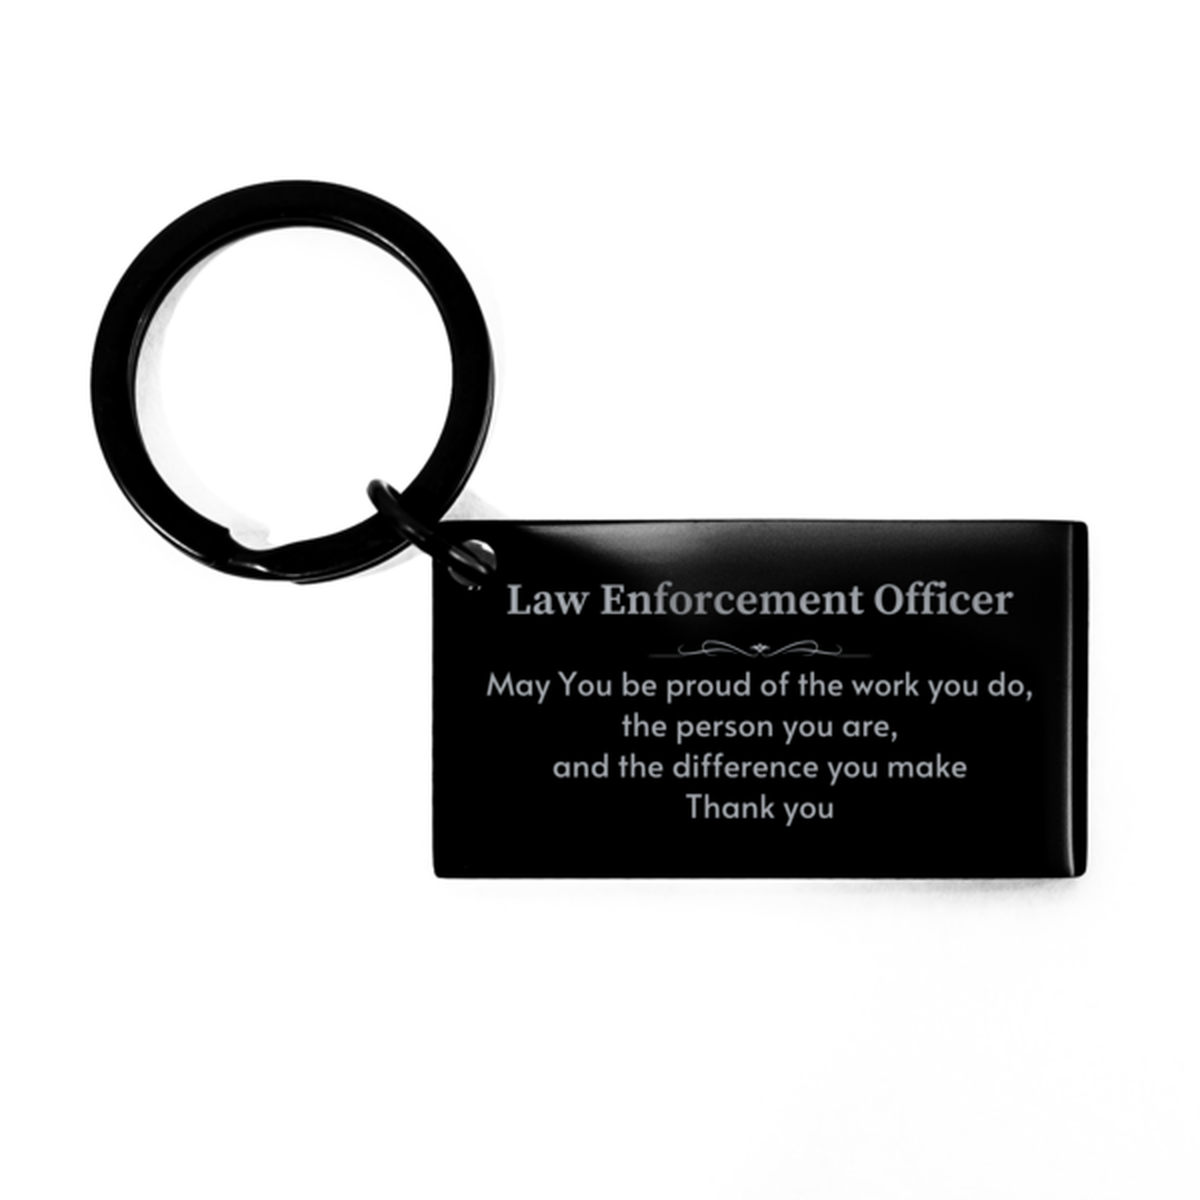 Heartwarming Keychain Retirement Coworkers Gifts for Law Enforcement Officer, Naval Architect May You be proud of the work you do, the person you are Gifts for Boss Men Women Friends